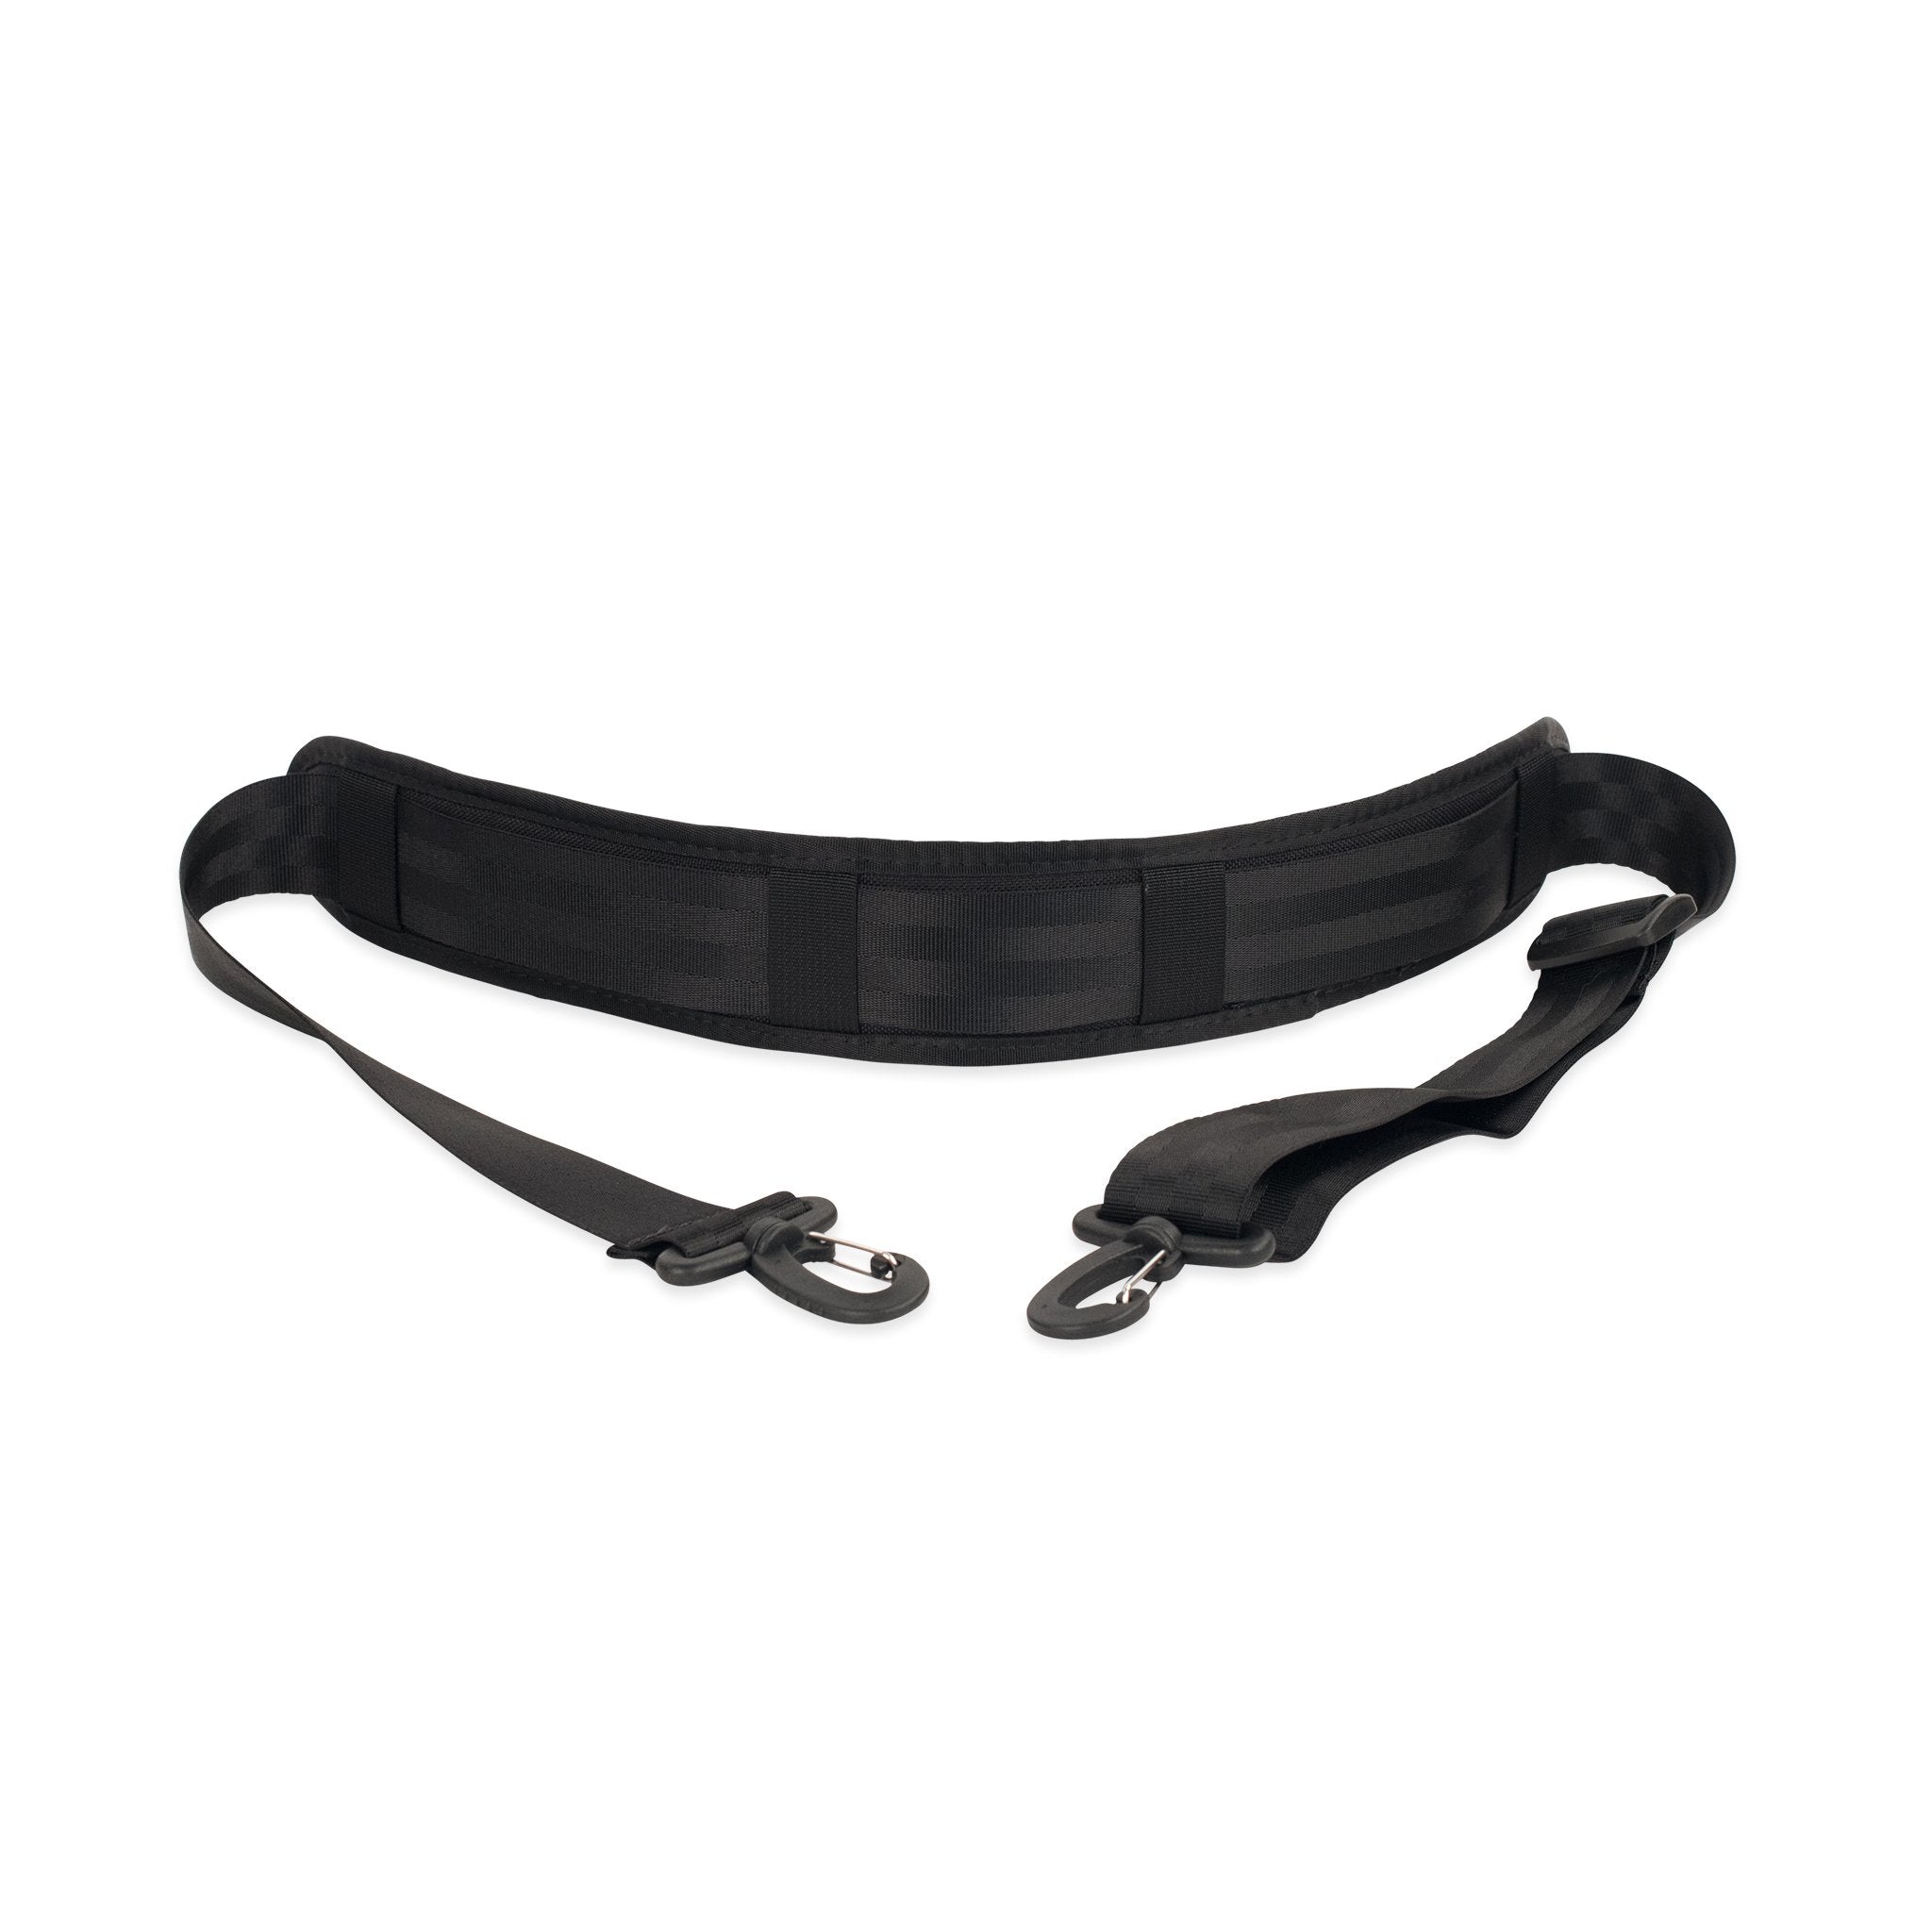 Black Color Padded Adjustable Up to 54 Length Shoulder Strap with Swivel  Hook for Bags/Briefcases/Luggage 